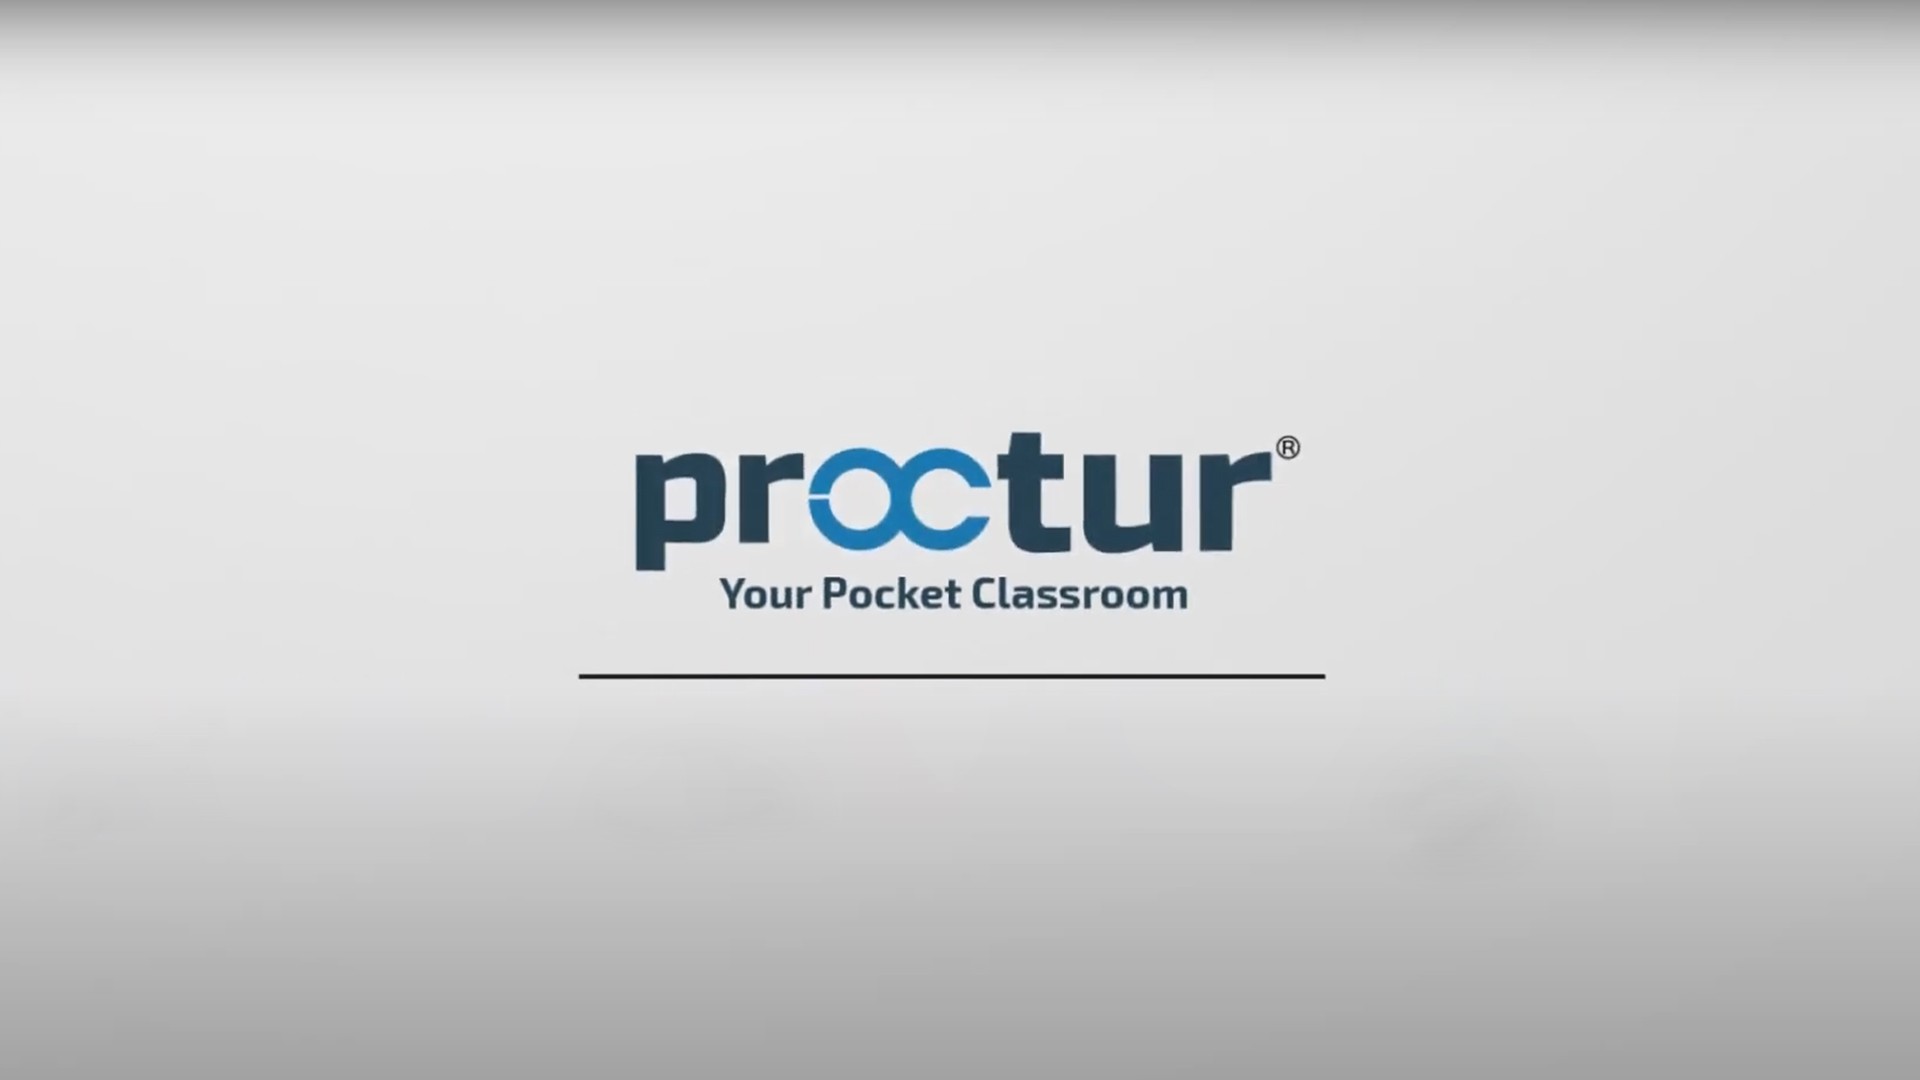 Introducing Proctur Your Pocket Classroom